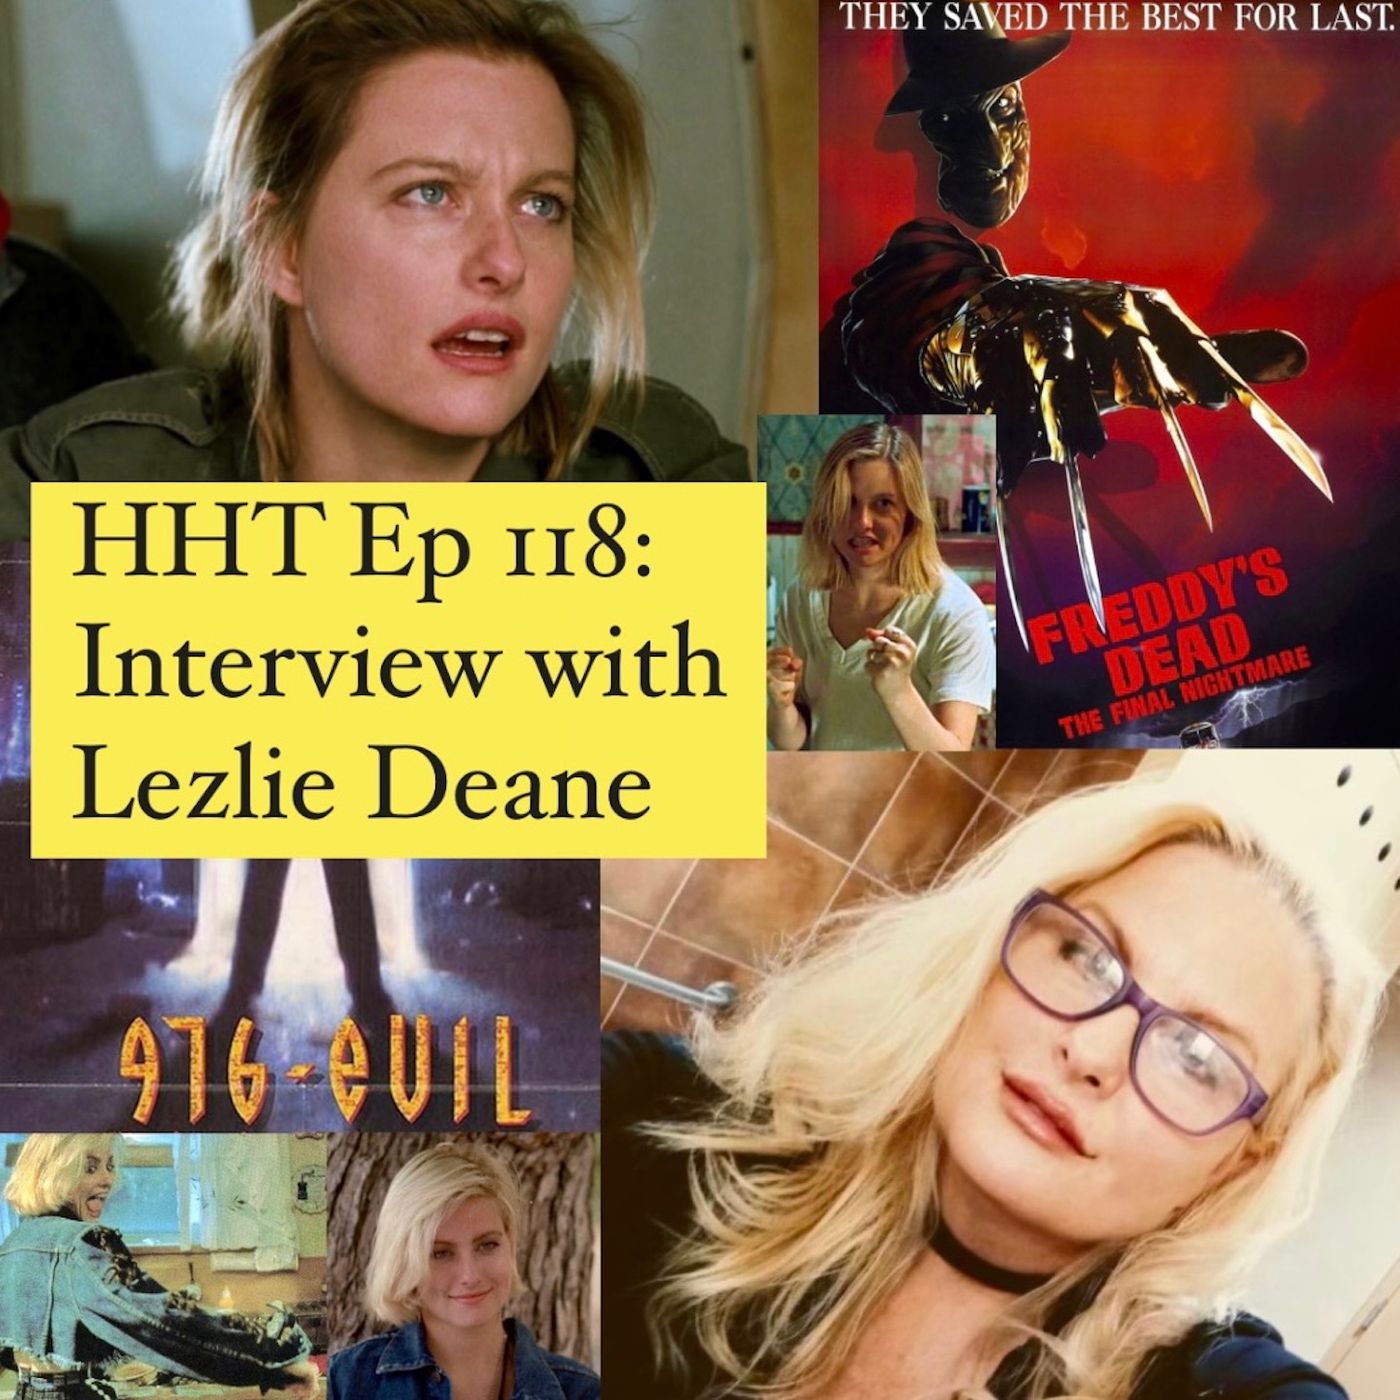 Ep 118: Interview w/Lezlie Deane from “Freddy’s Dead” & “976-EVIL” Image